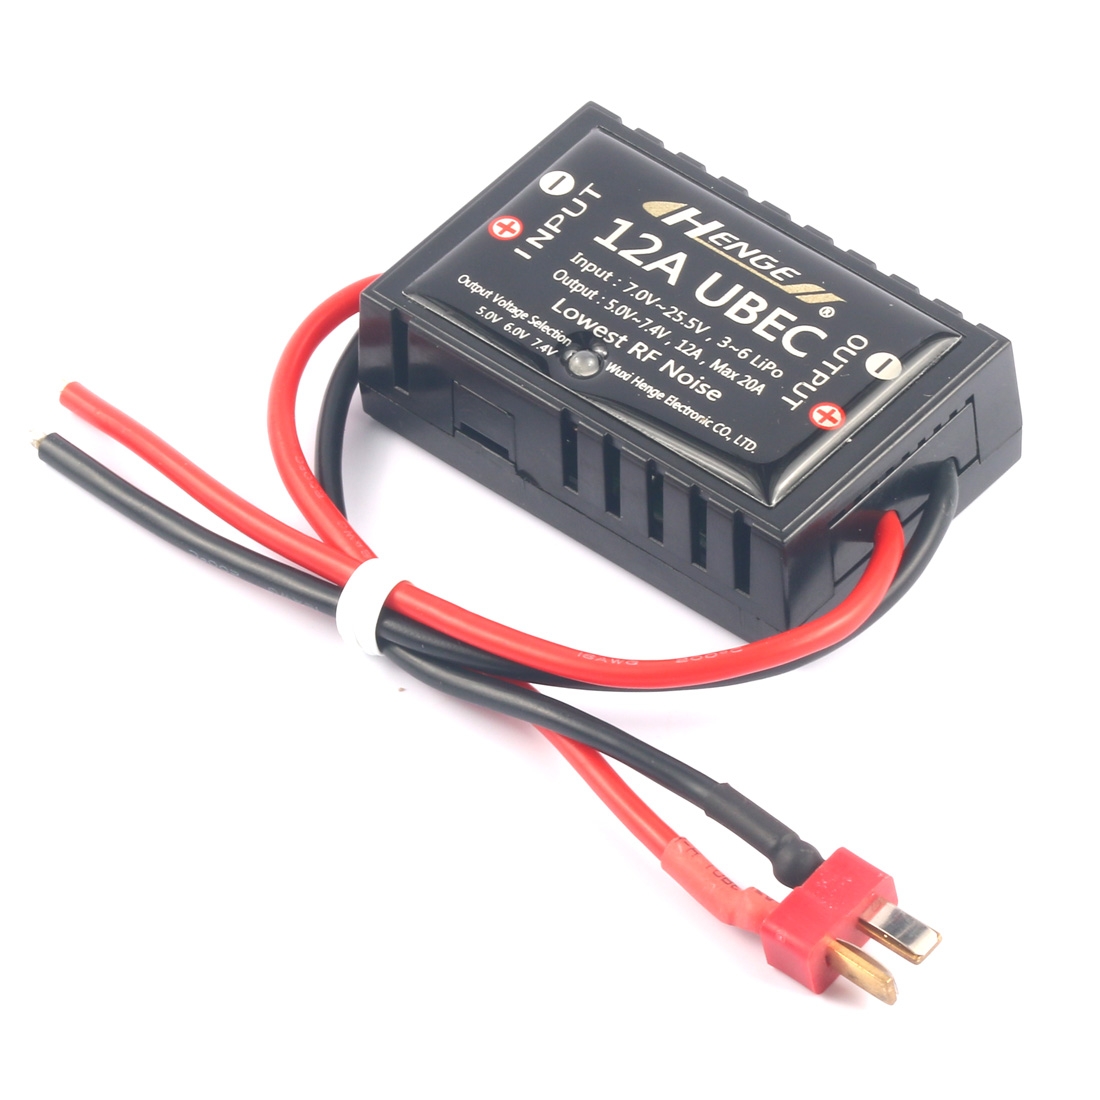 HENGE 12A UBEC RC Brushless ESC 5V/6V/7.4V 12A Max 20A Inport 3S-6S Lipo Switch BEC for RC Airplane FPV Racing Drone Plane Aircraft Helicopter Car Boat